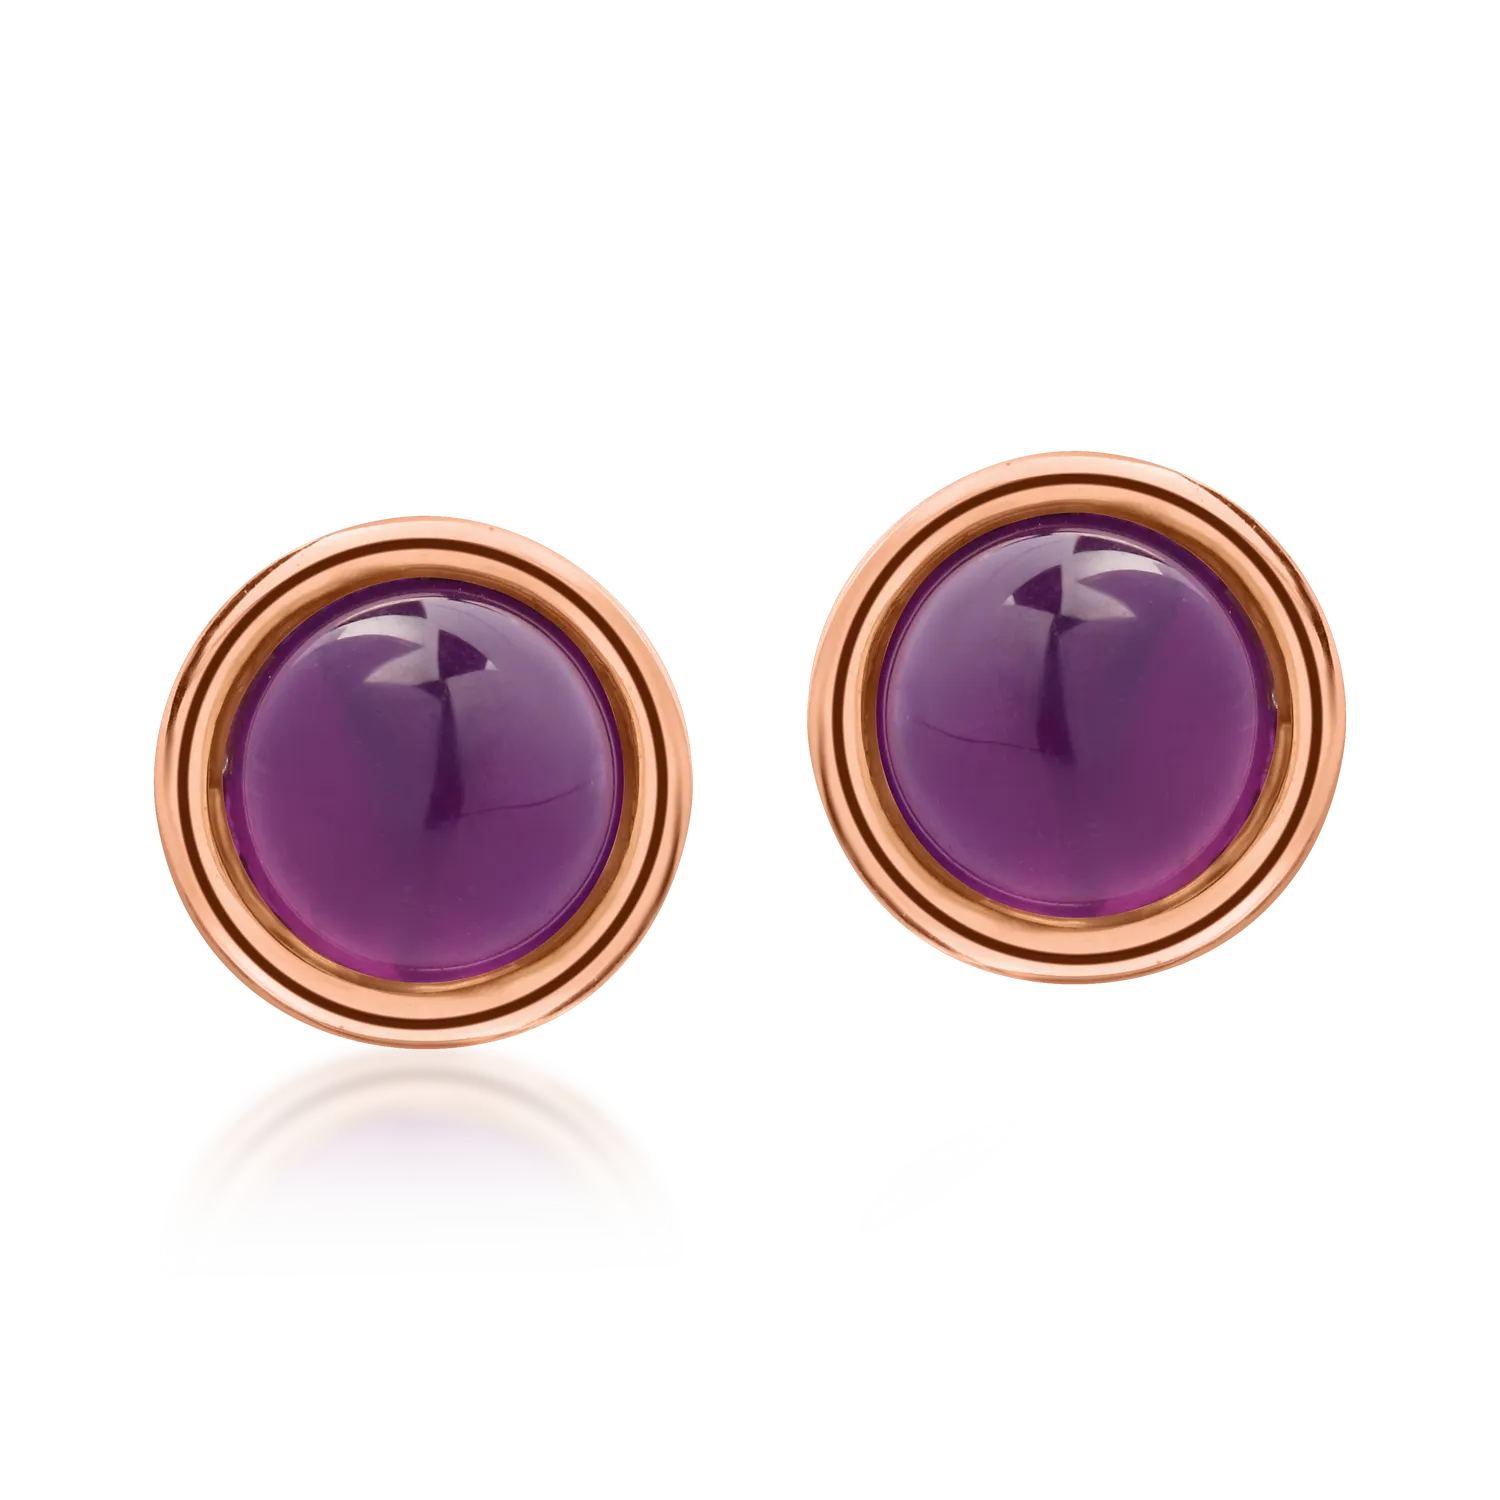 14K rose gold earrings with 0.6ct amethysts